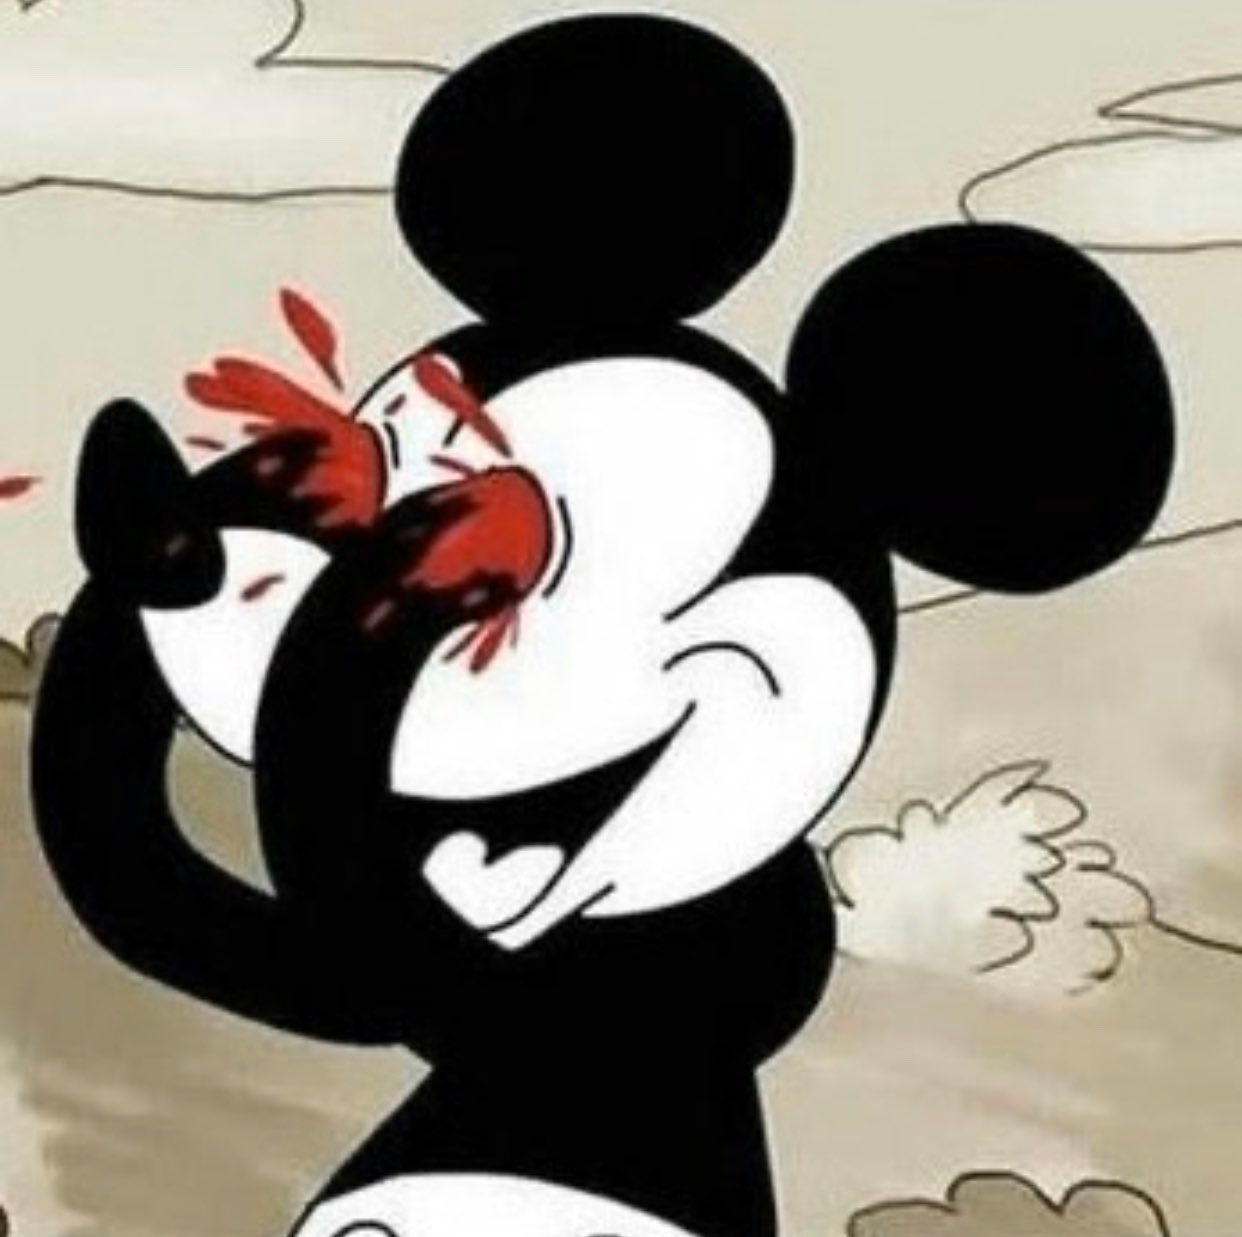 Mickey Mouse gouging his eyes out